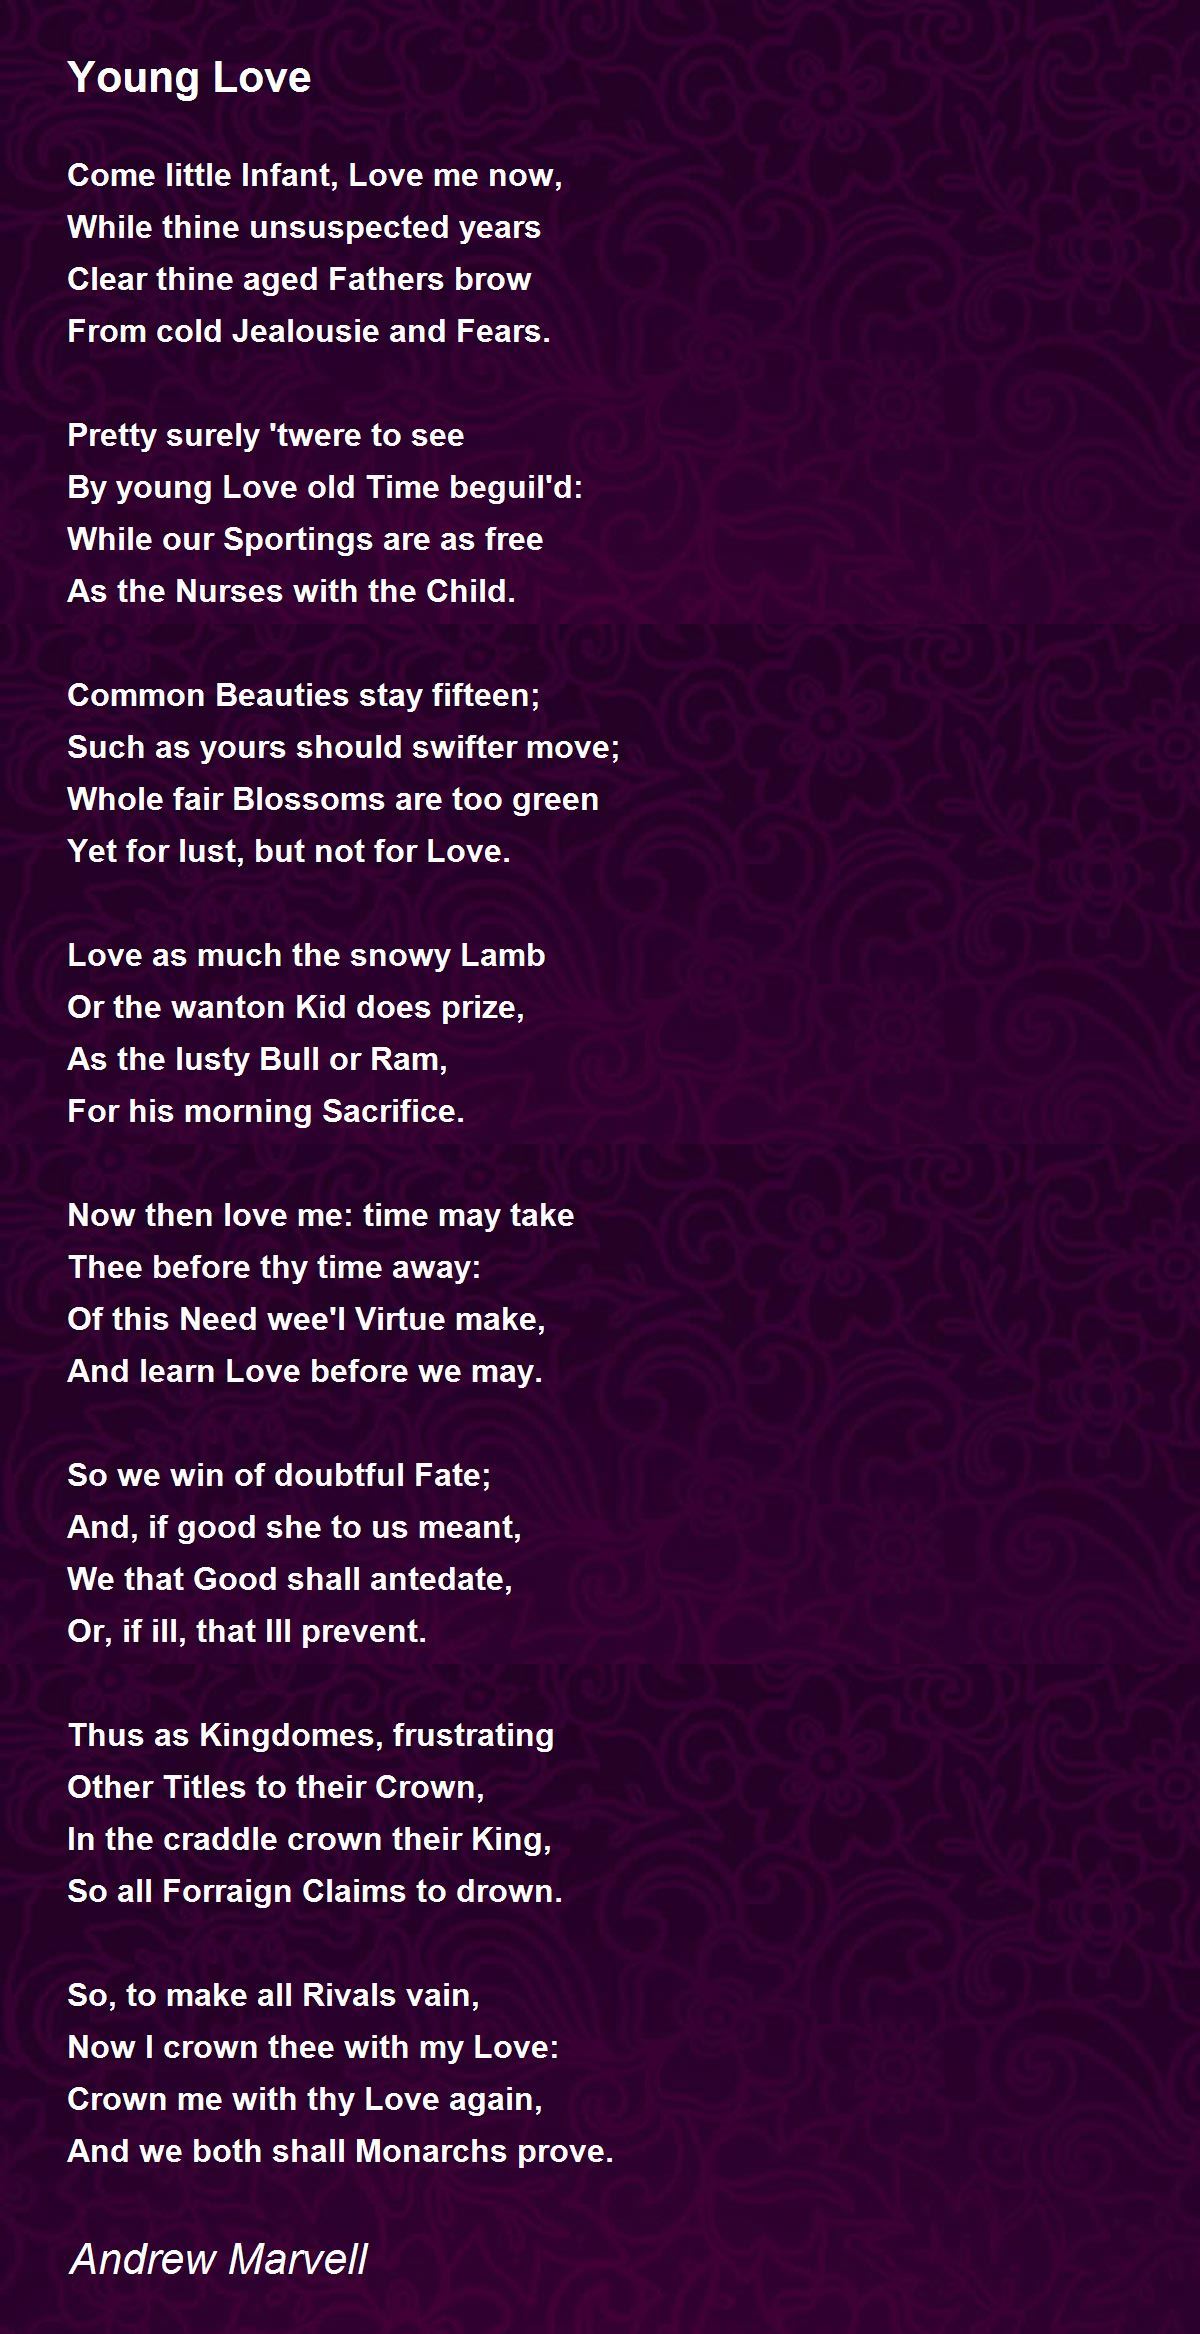 Young Love Poem by Andrew Marvell - Poem Hunter